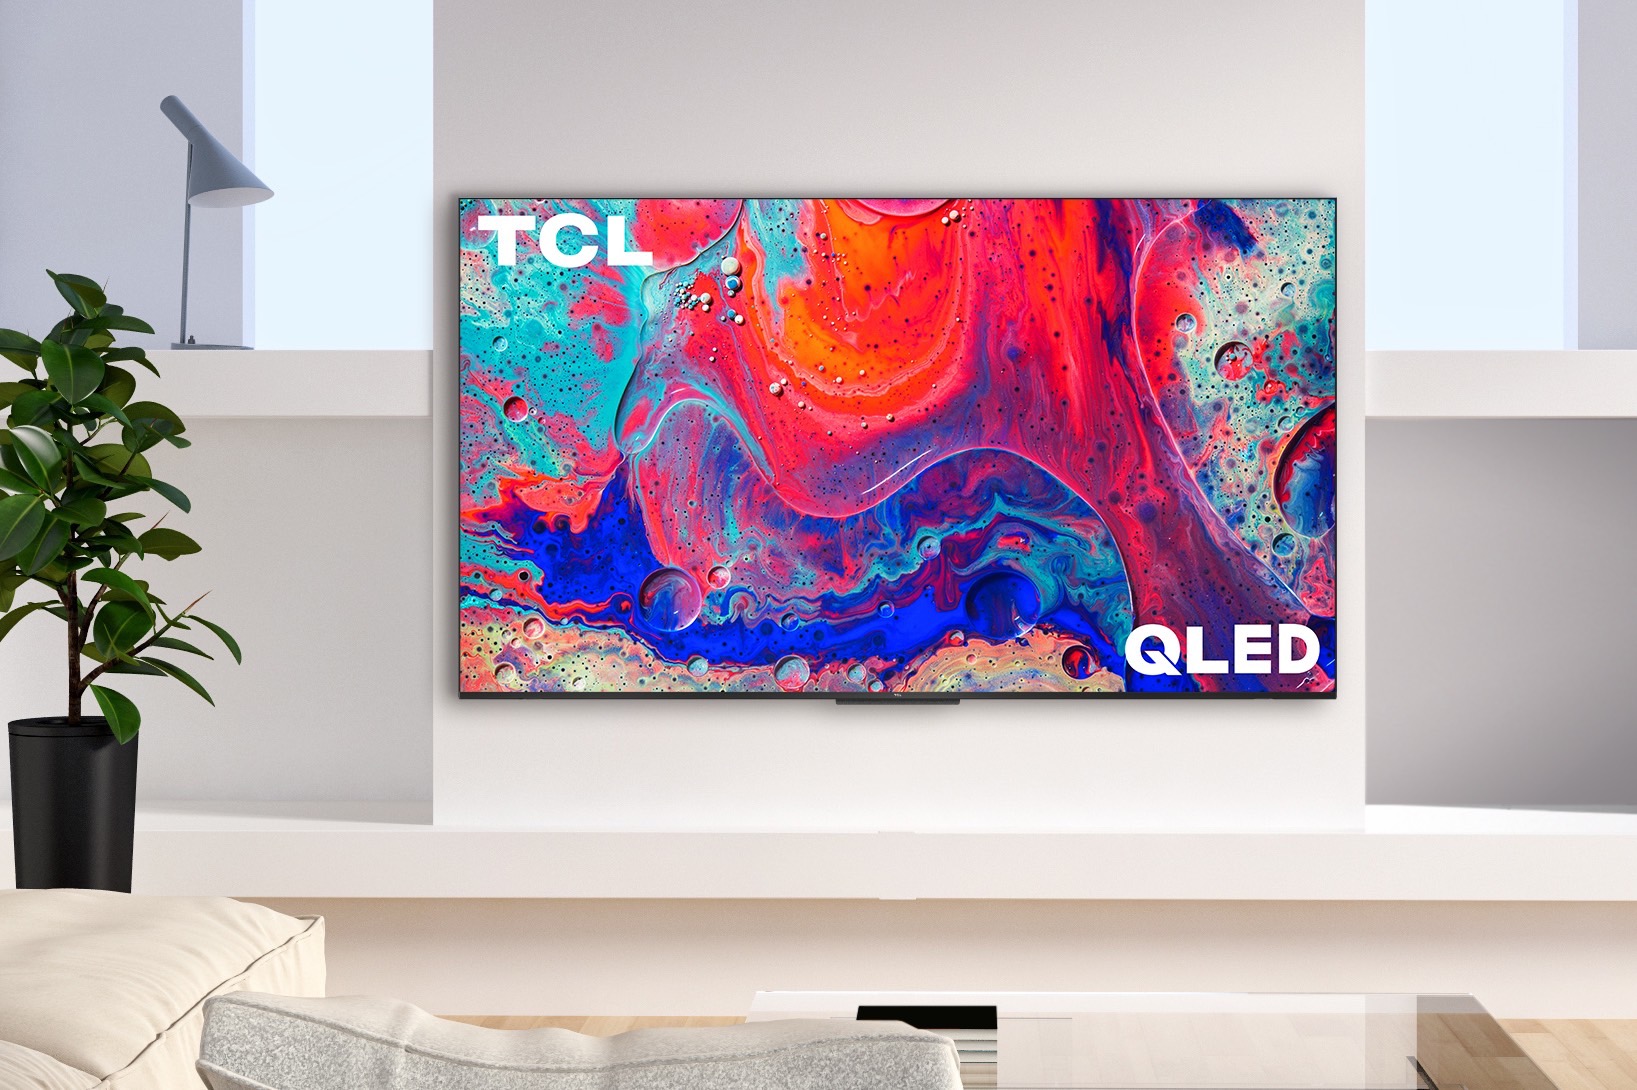 This is your chance to get a 55-inch QLED Tv for underneath $430